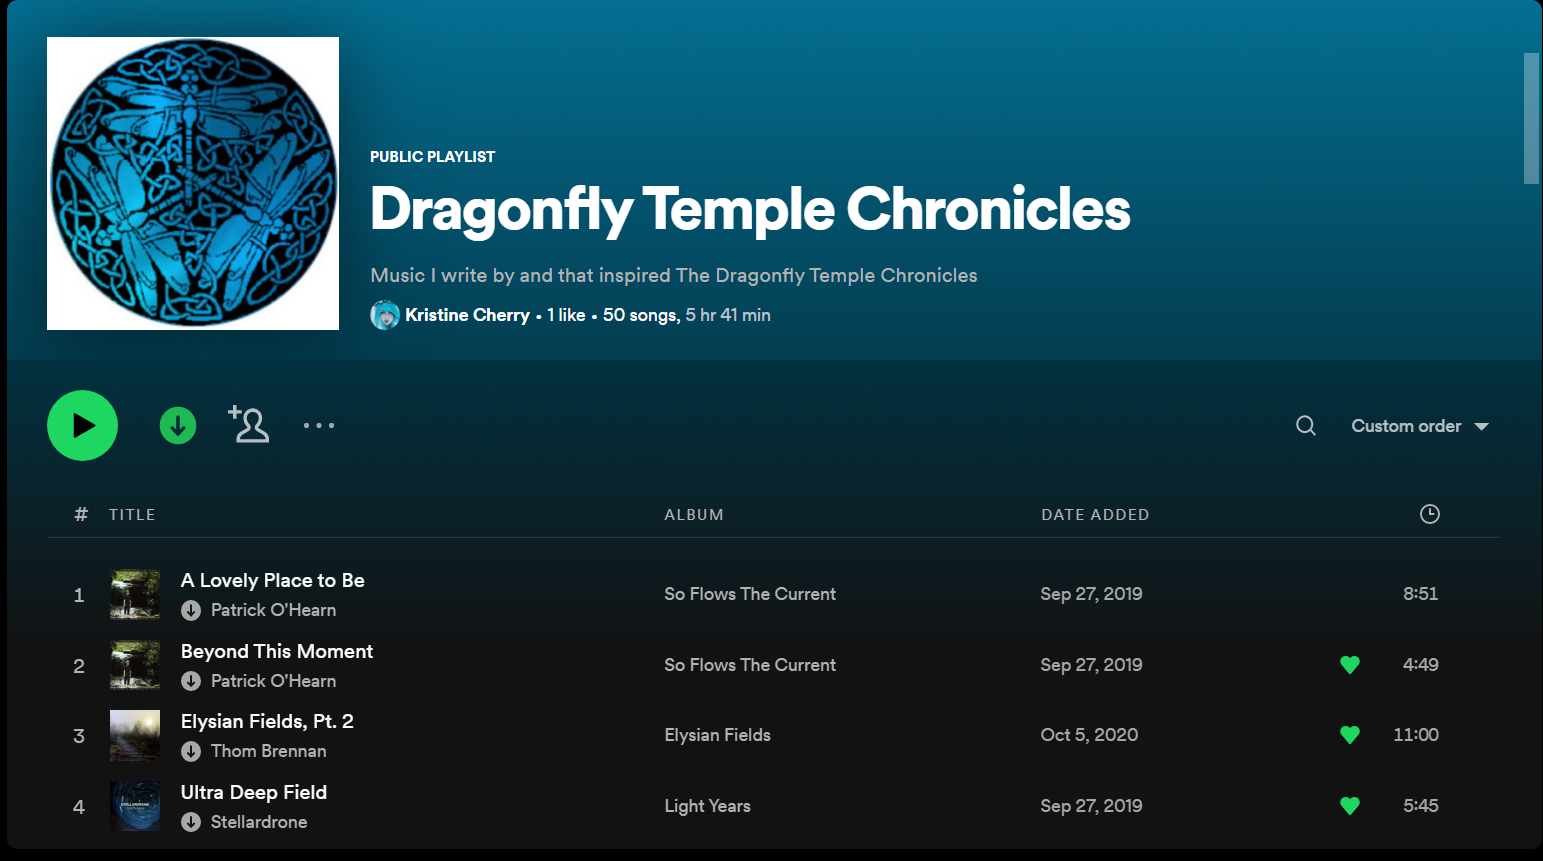 Music and the Dragonfly Temple Chronicles